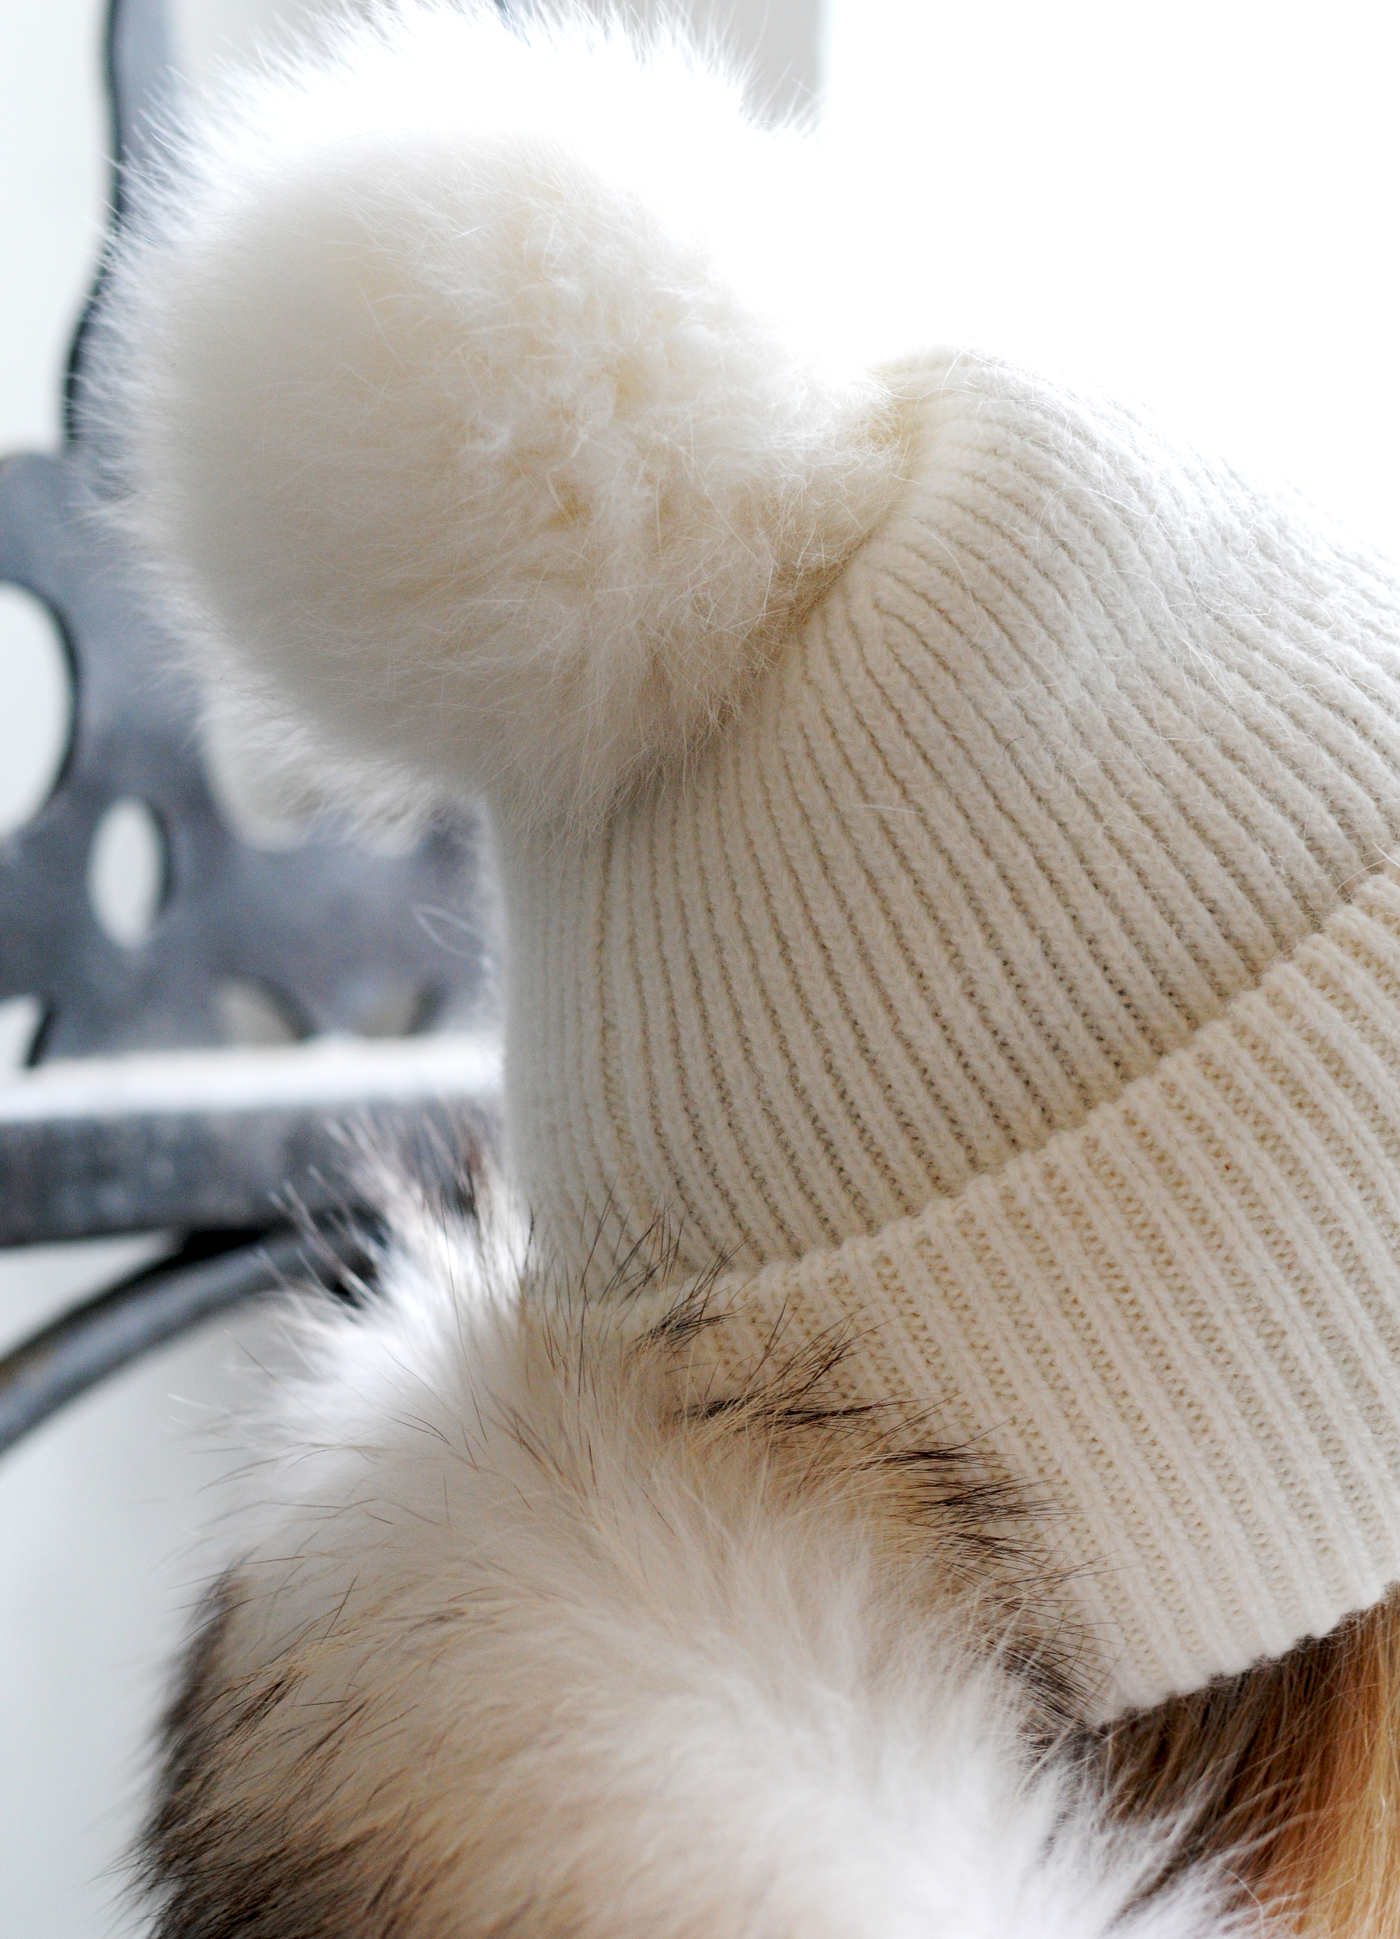 HL22C007 Angora Hat - Knitted Yarn - Accesories - White